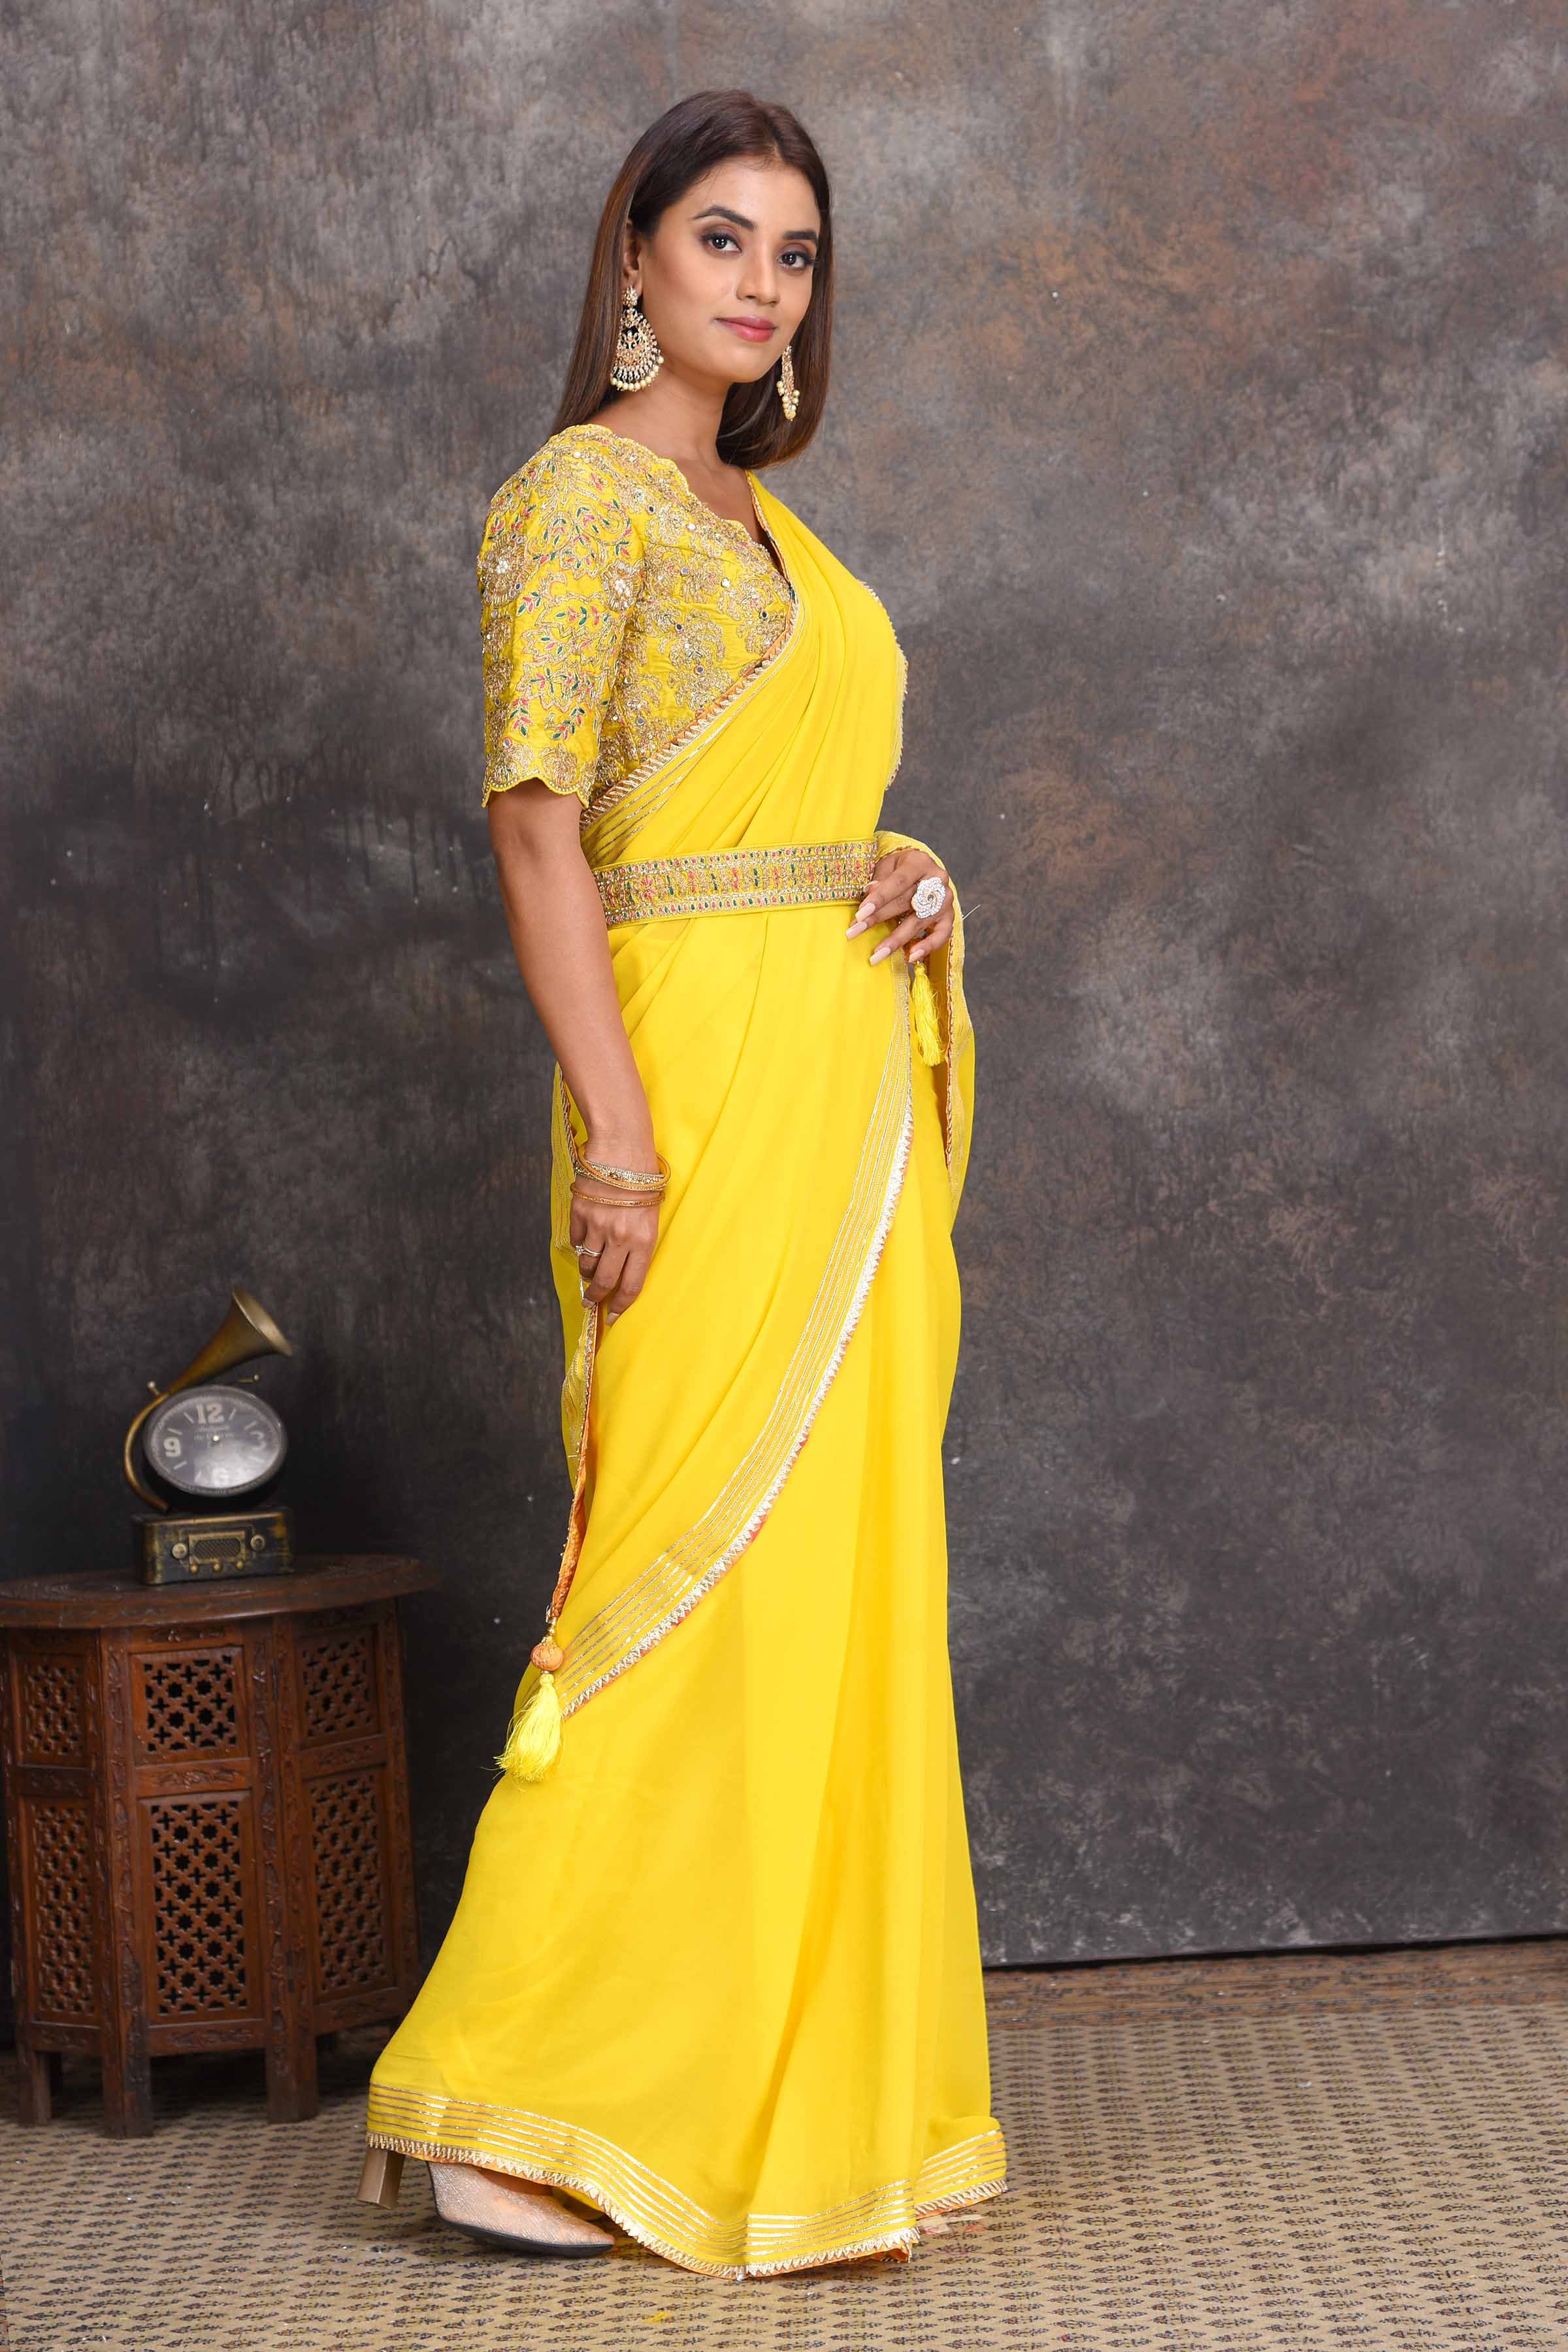 Buy beautiful yellow georgette saree online in USA with embroidered belt and blouse. Set a style statement on special occasions in exquisite designer sarees, handwoven sarees, georgette sarees, embroidered sarees, Banarasi saree, pure silk saris, tussar sarees from Pure Elegance Indian saree store in USA.-right